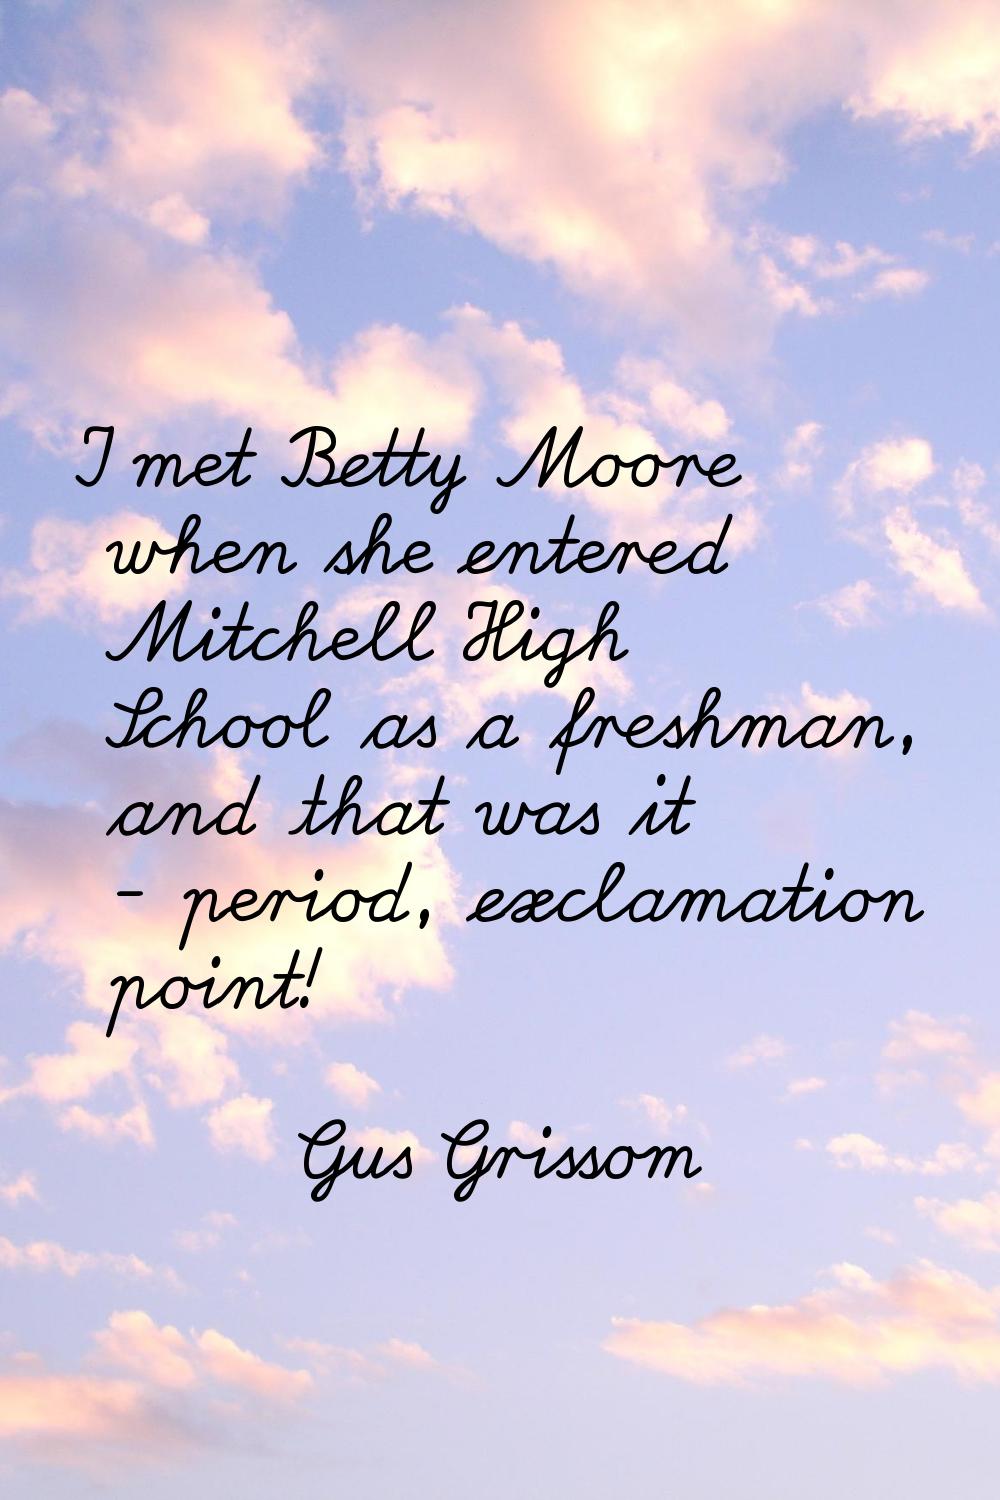 I met Betty Moore when she entered Mitchell High School as a freshman, and that was it - period, ex